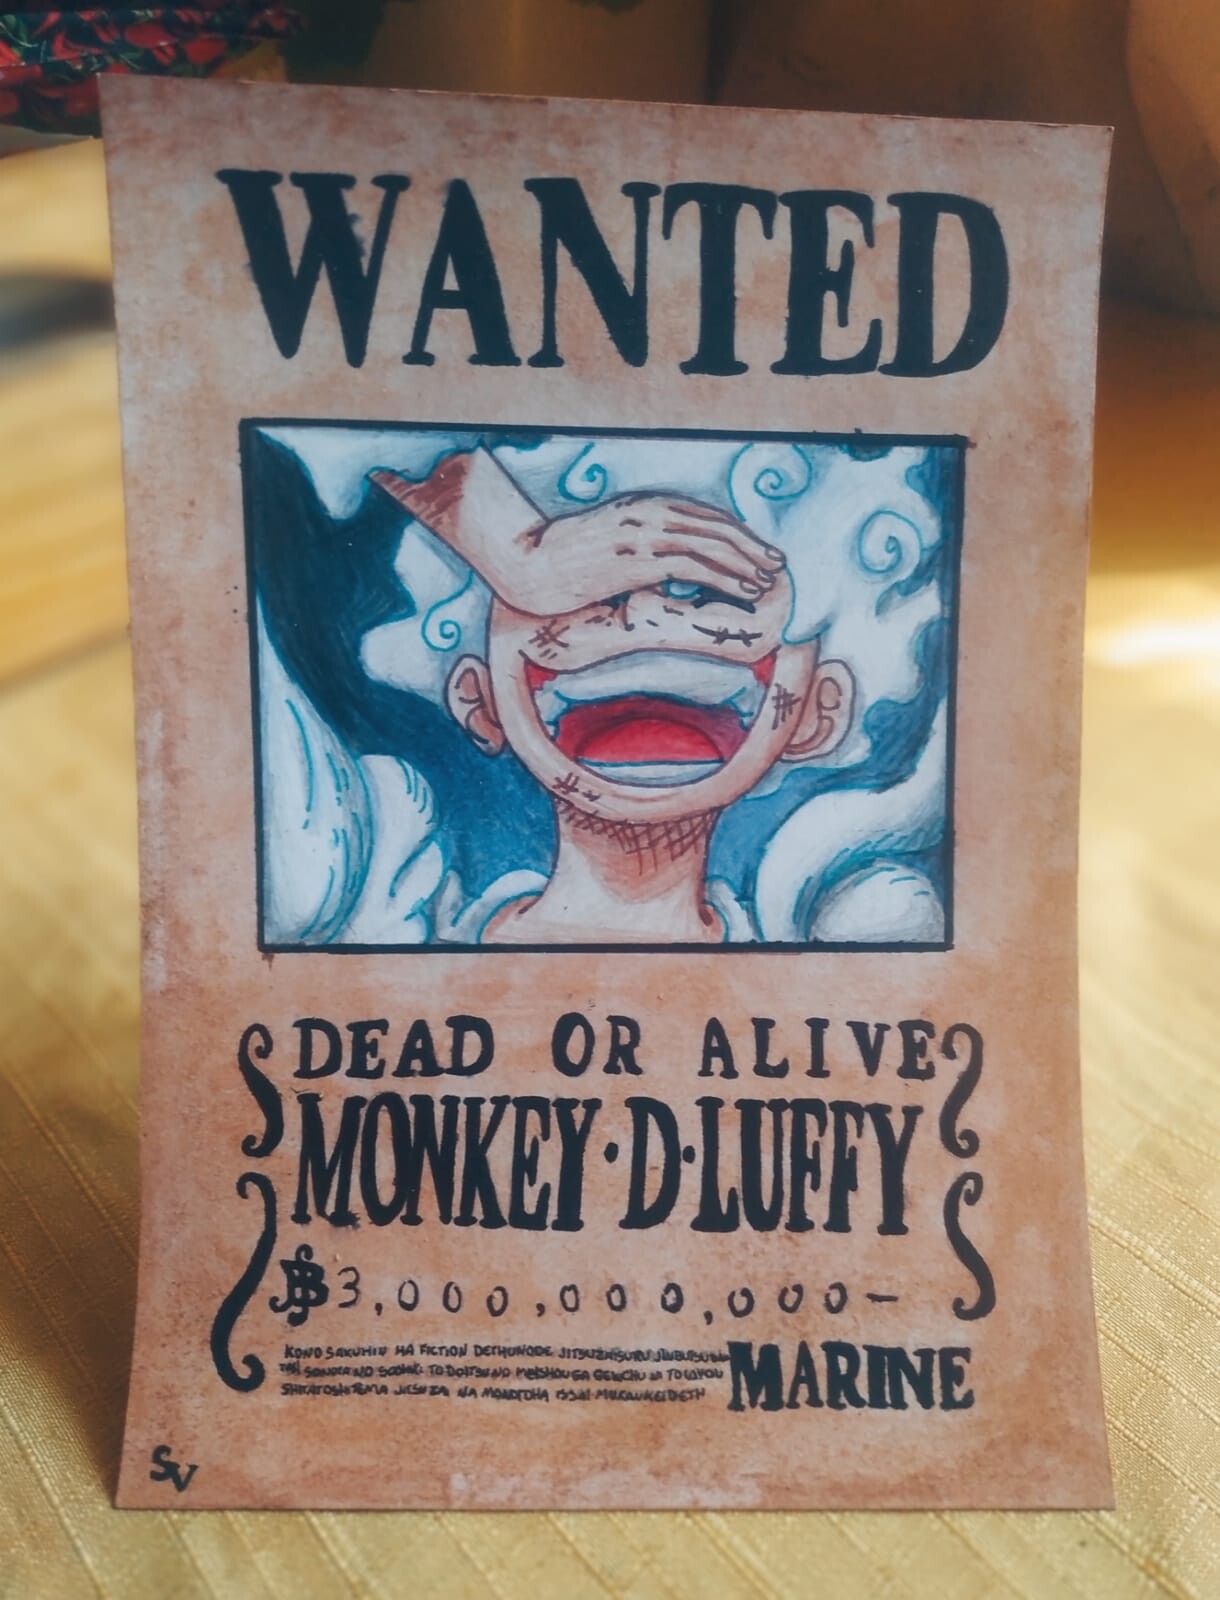 How much is Monkey D. Luffy's bounty?